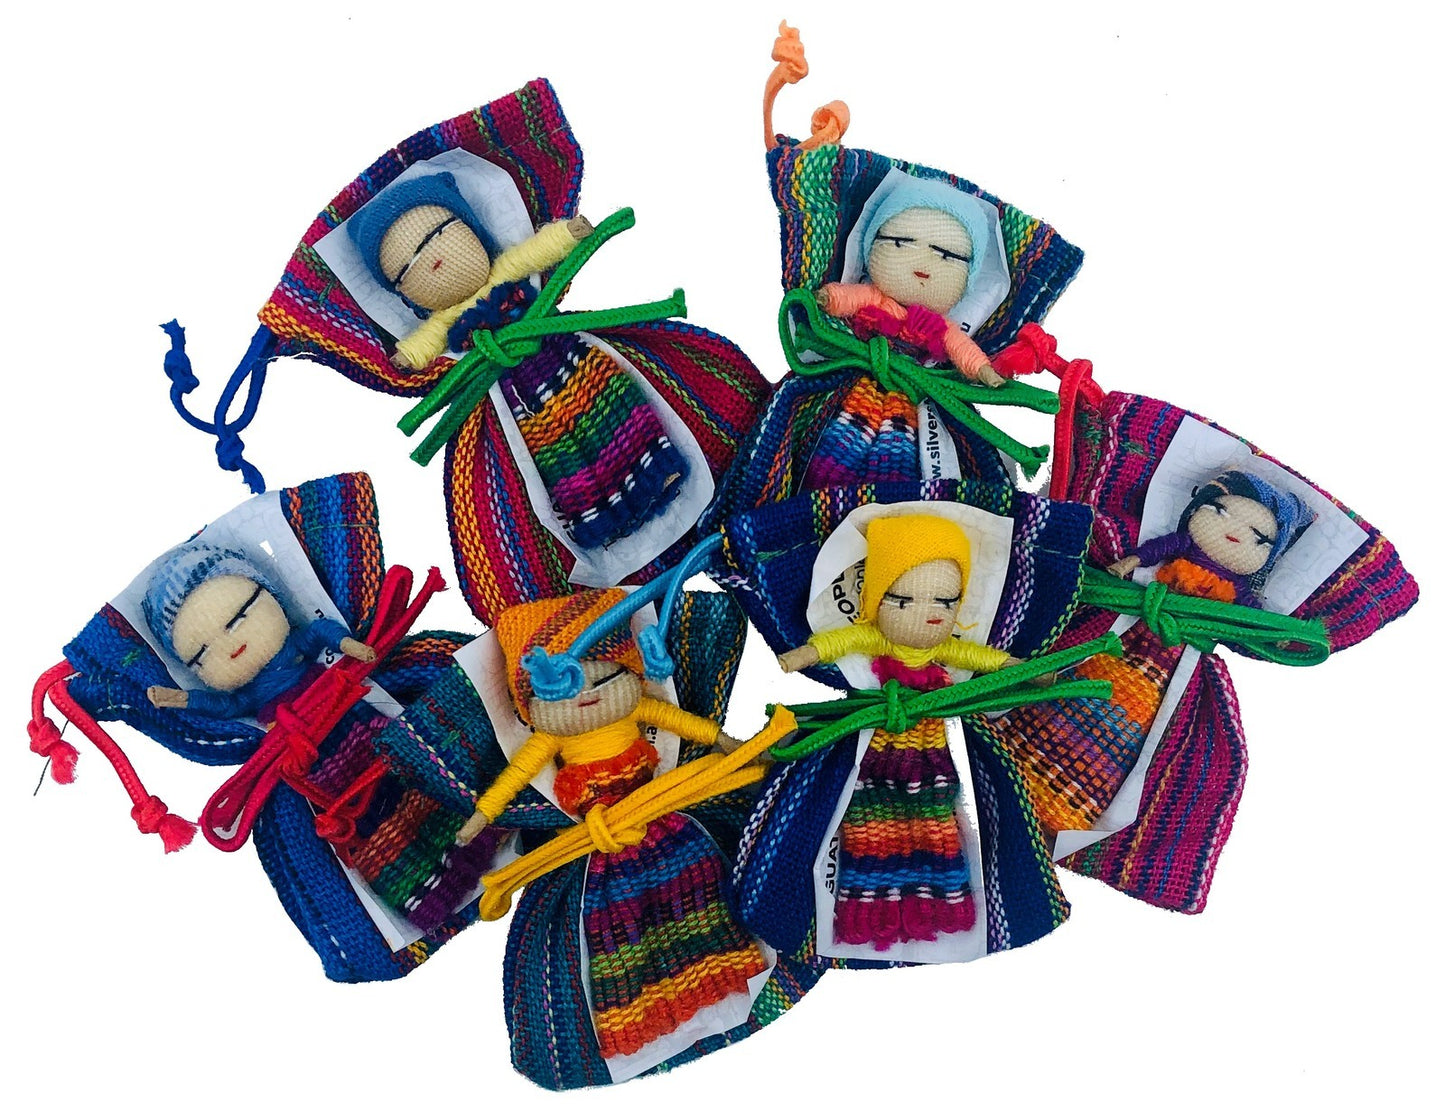 Saltco Guatemalan Worry Doll Large With Bag(1 Doll), 100% Handmade In Guatemala